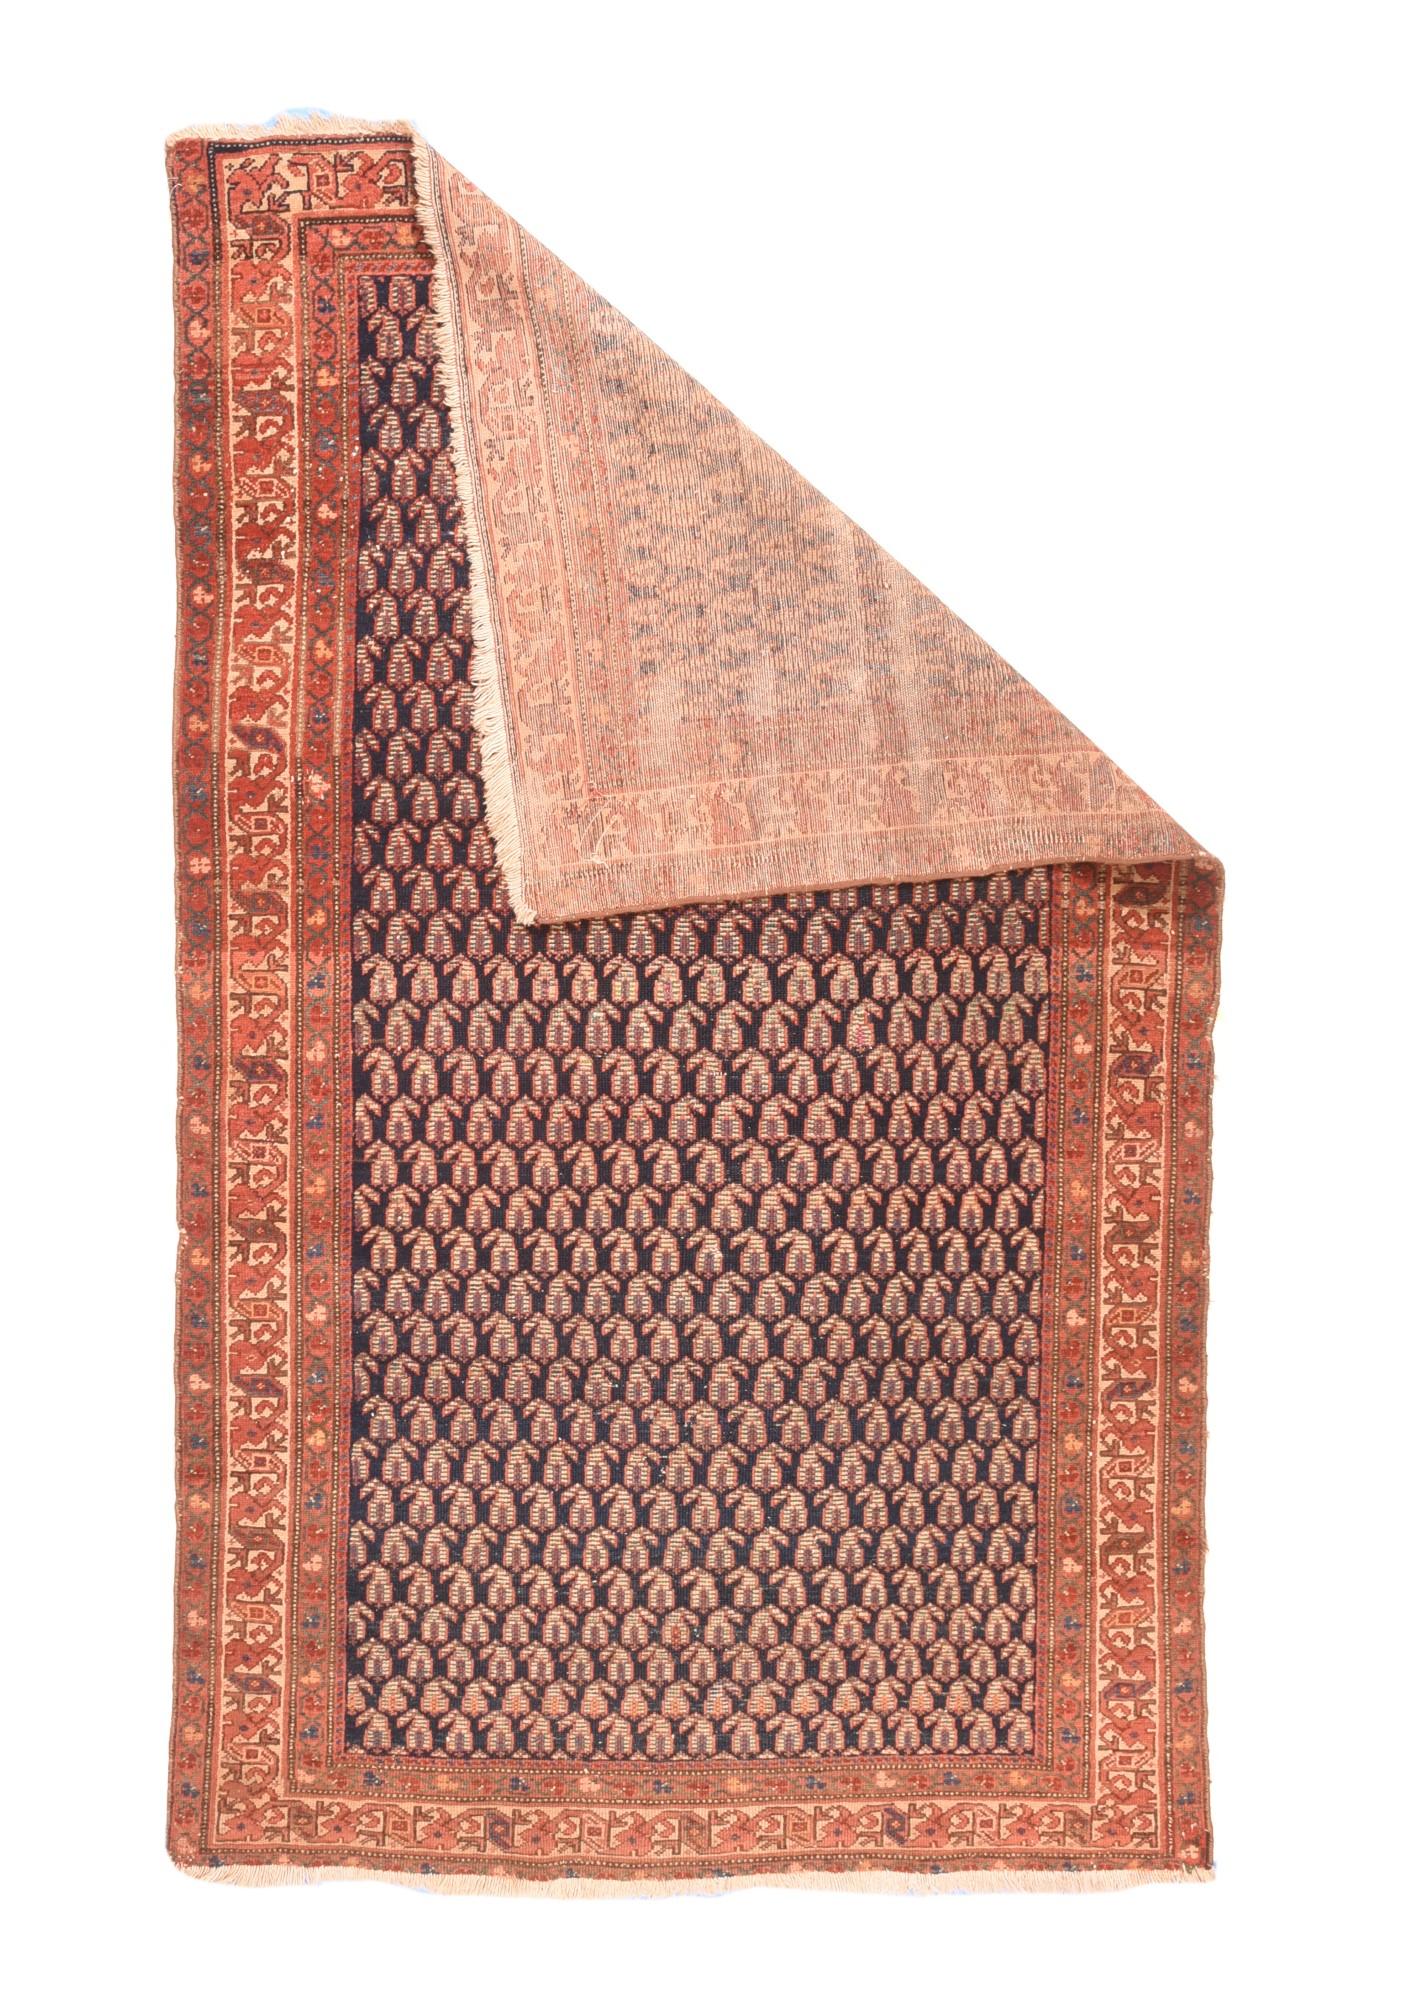 Antique Malayer rug measures: 4' x 6'7''. An almost complete three-column version of the classic Harshang (